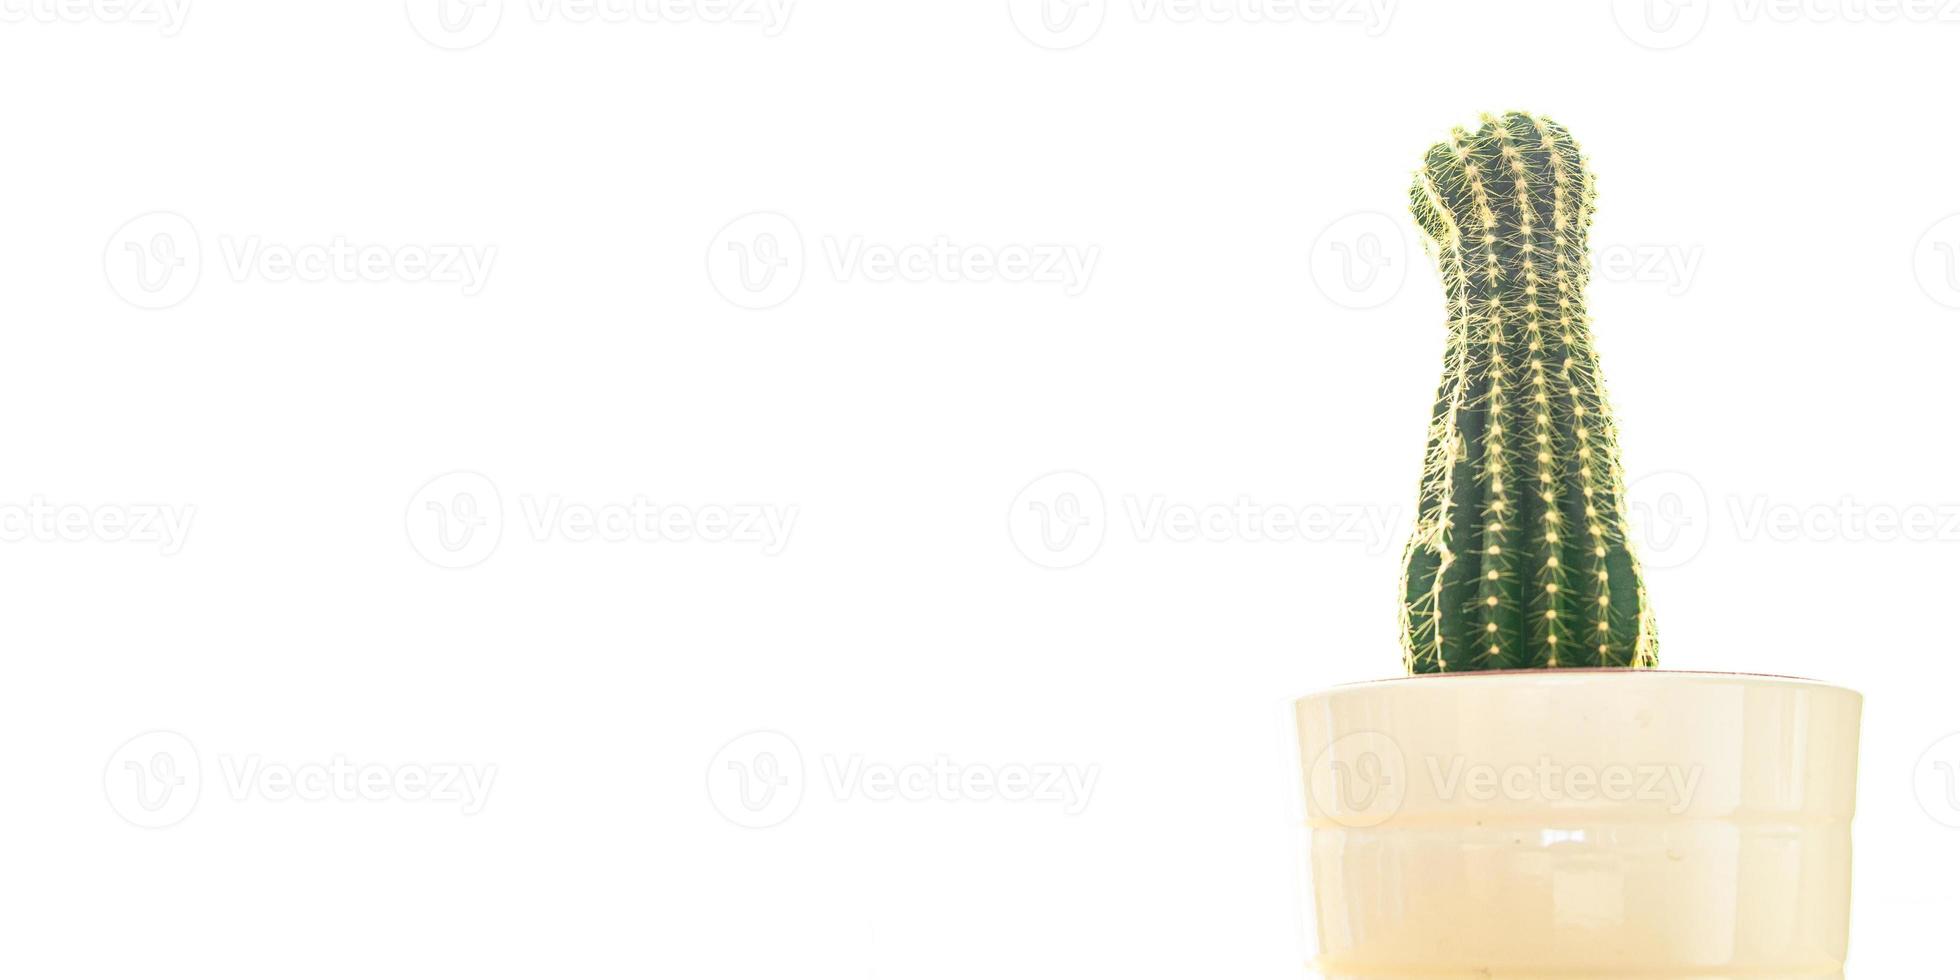 cactus thorny succulent plant home plant evergreen indoor flower in a flower pot on the table copy space photo